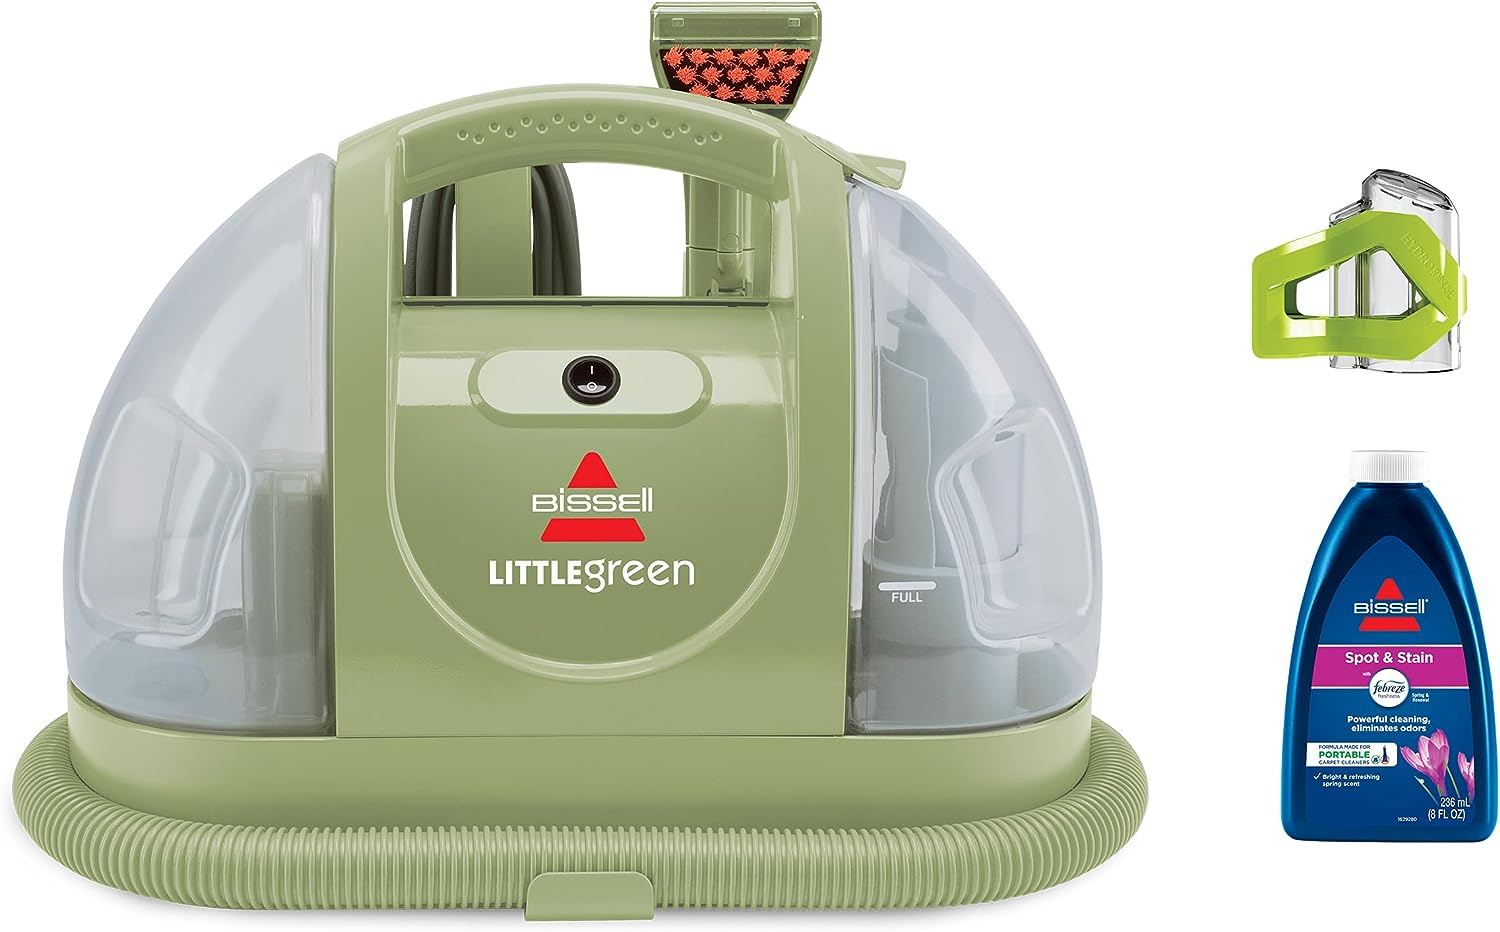 BISSELL Little Green Multi-Purpose Portable Carpet and [...]